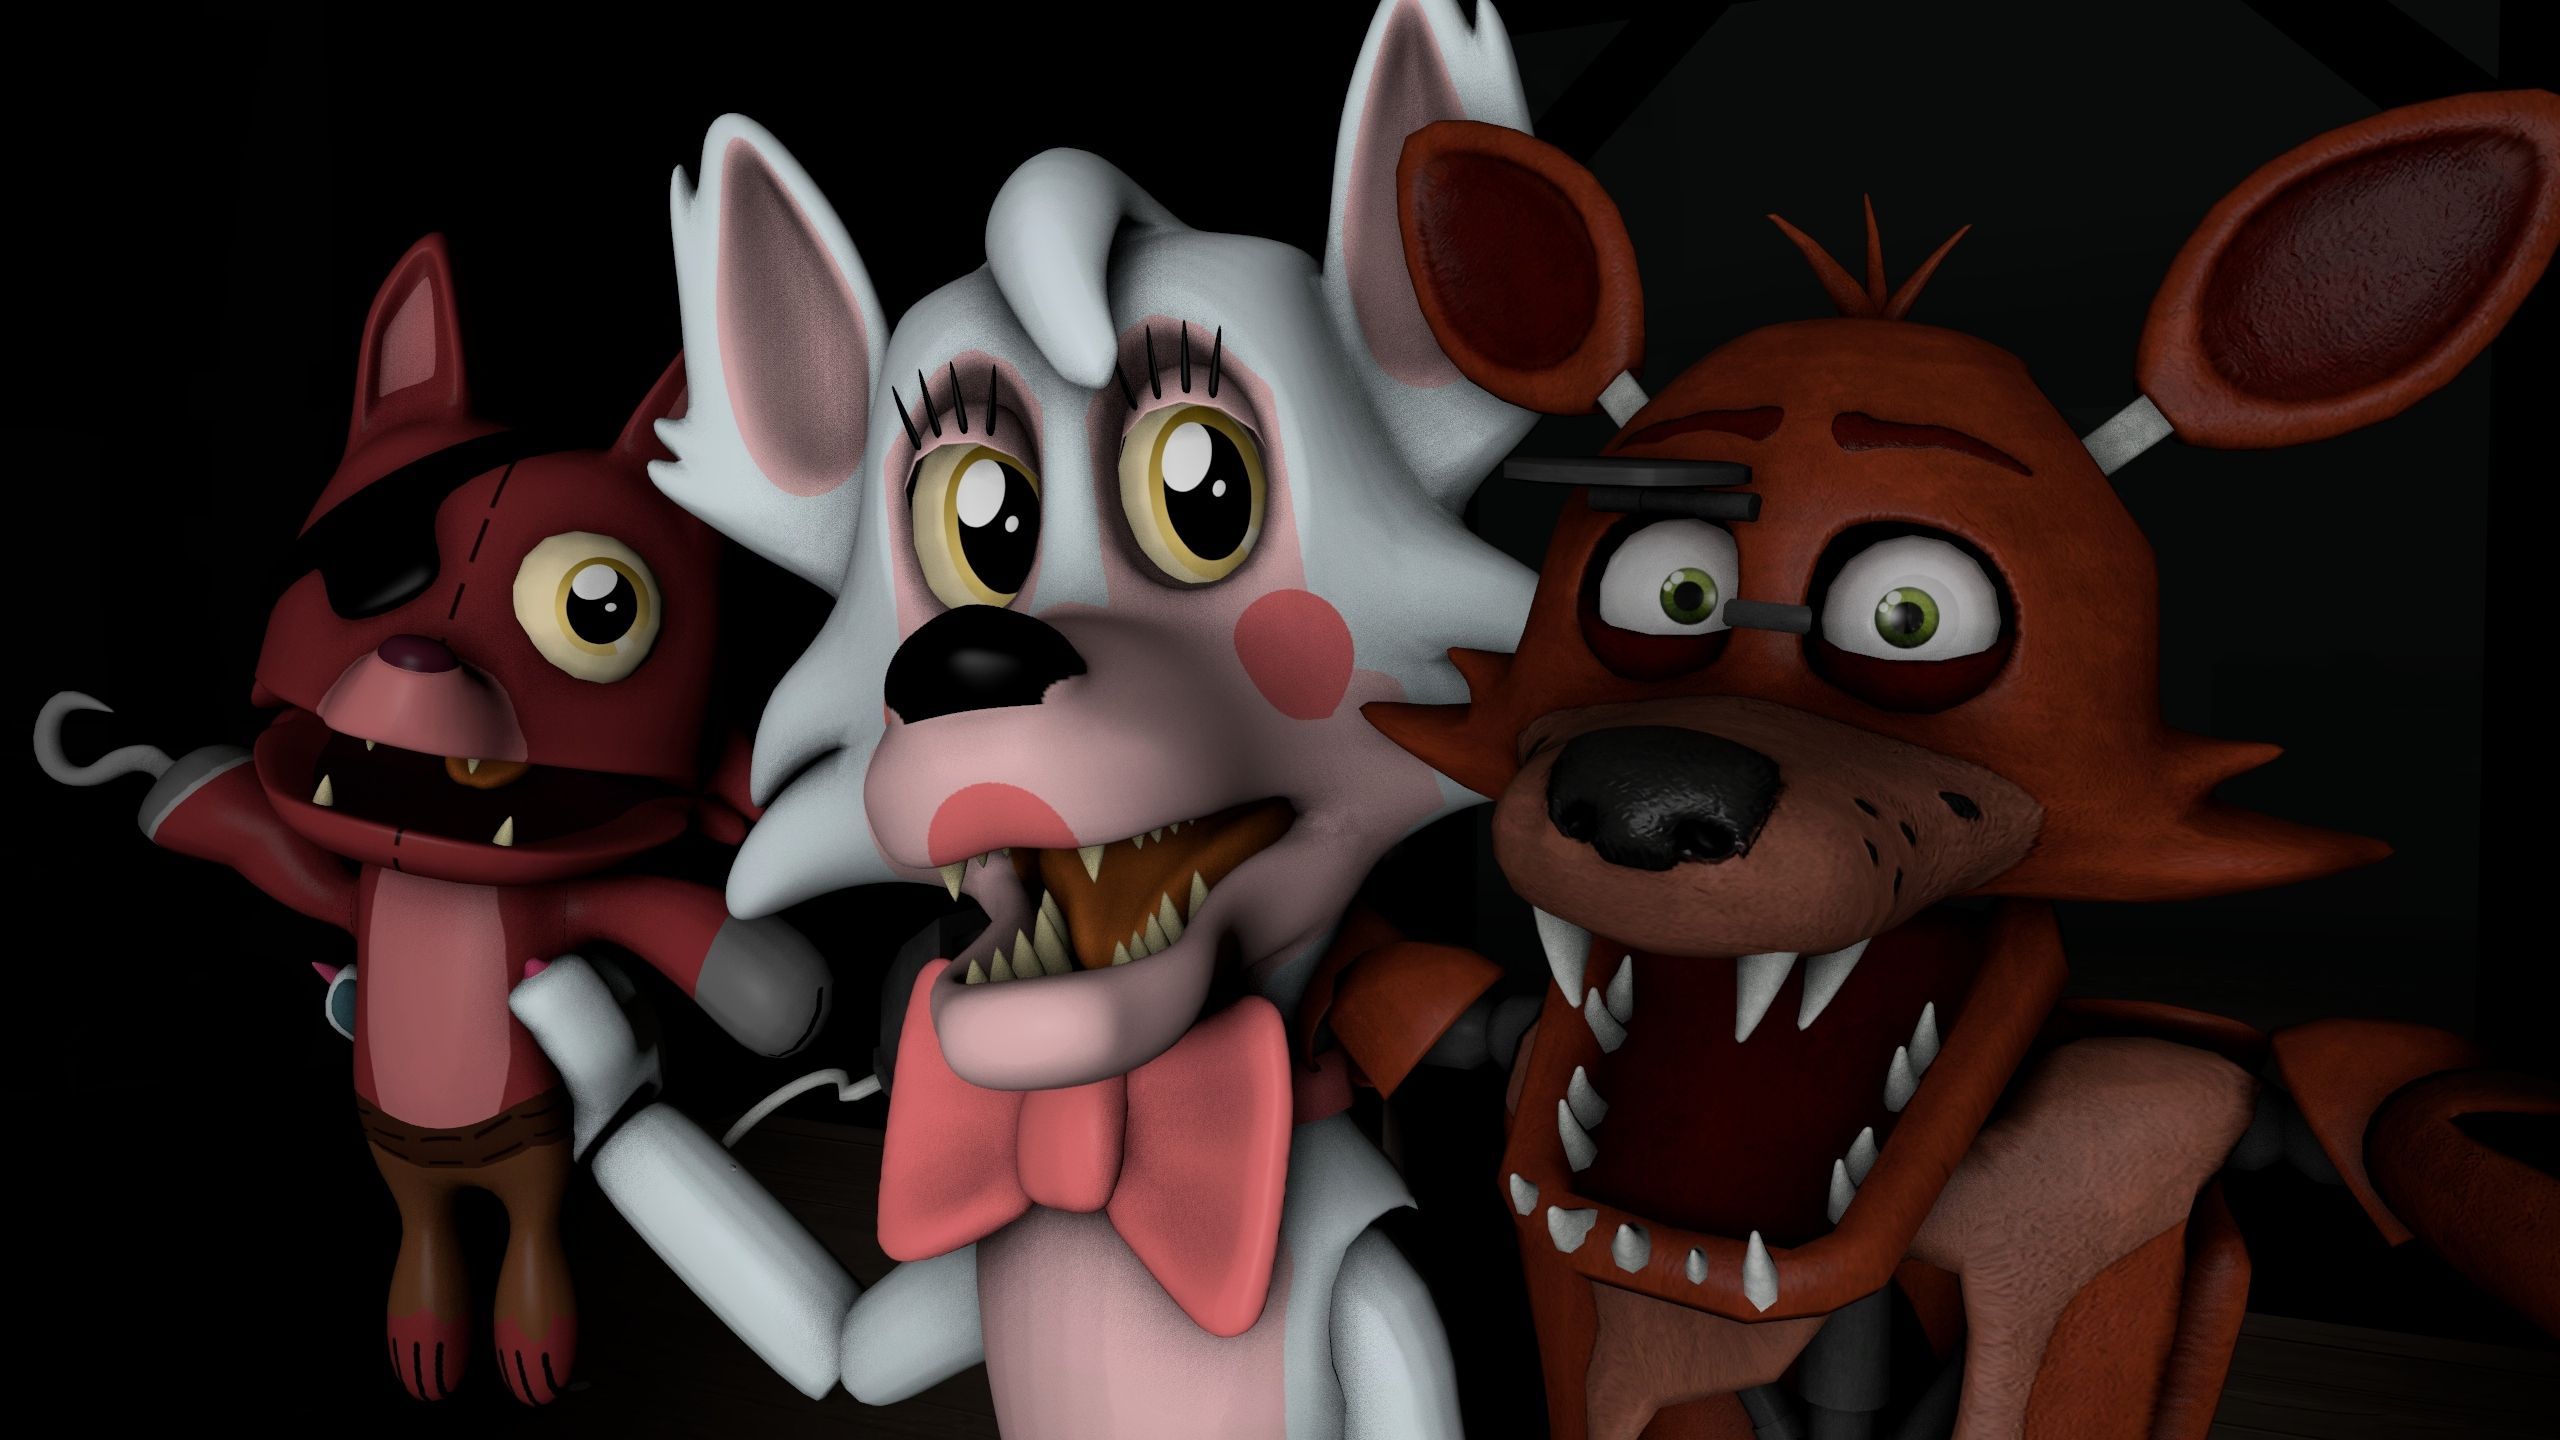 Fnaf Foxy Wallpapers Unique Fnaf Foxy and Mangle Wallpapers.